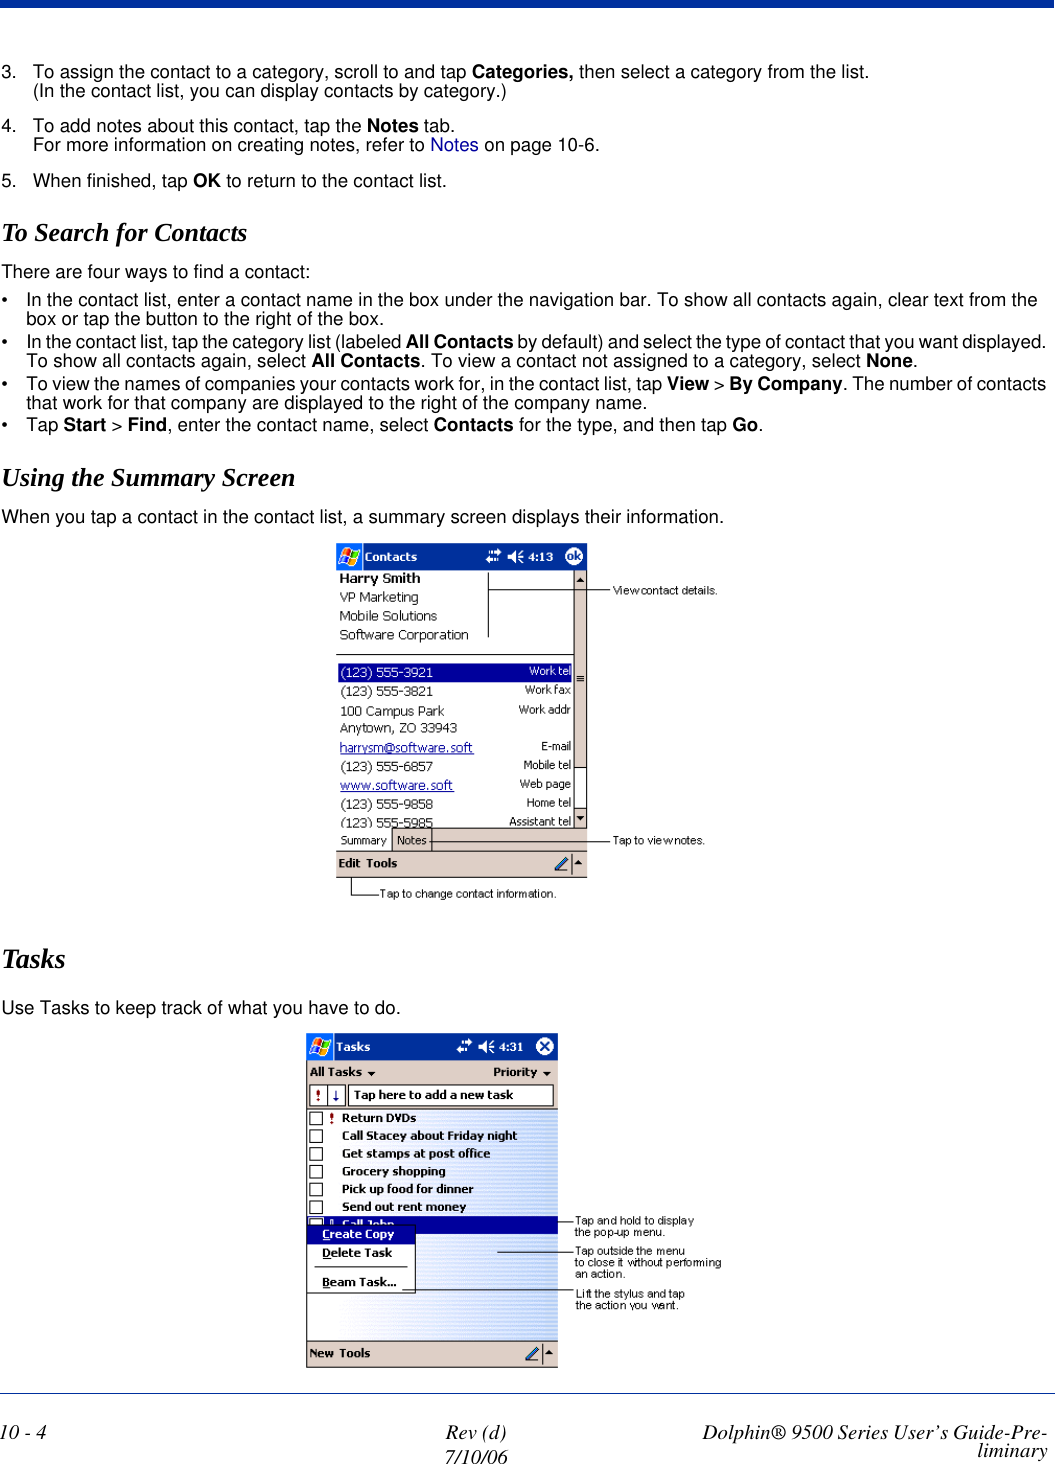 10 - 4 Rev (d)7/10/06 Dolphin® 9500 Series User’s Guide-Pre-liminary3. To assign the contact to a category, scroll to and tap Categories, then select a category from the list. (In the contact list, you can display contacts by category.)4. To add notes about this contact, tap the Notes tab.For more information on creating notes, refer to Notes on page 10-6.5. When finished, tap OK to return to the contact list.To Search for ContactsThere are four ways to find a contact: • In the contact list, enter a contact name in the box under the navigation bar. To show all contacts again, clear text from the box or tap the button to the right of the box. • In the contact list, tap the category list (labeled All Contacts by default) and select the type of contact that you want displayed. To show all contacts again, select All Contacts. To view a contact not assigned to a category, select None. • To view the names of companies your contacts work for, in the contact list, tap View &gt; By Company. The number of contacts that work for that company are displayed to the right of the company name. •Tap Start &gt; Find, enter the contact name, select Contacts for the type, and then tap Go. Using the Summary ScreenWhen you tap a contact in the contact list, a summary screen displays their information. TasksUse Tasks to keep track of what you have to do. 